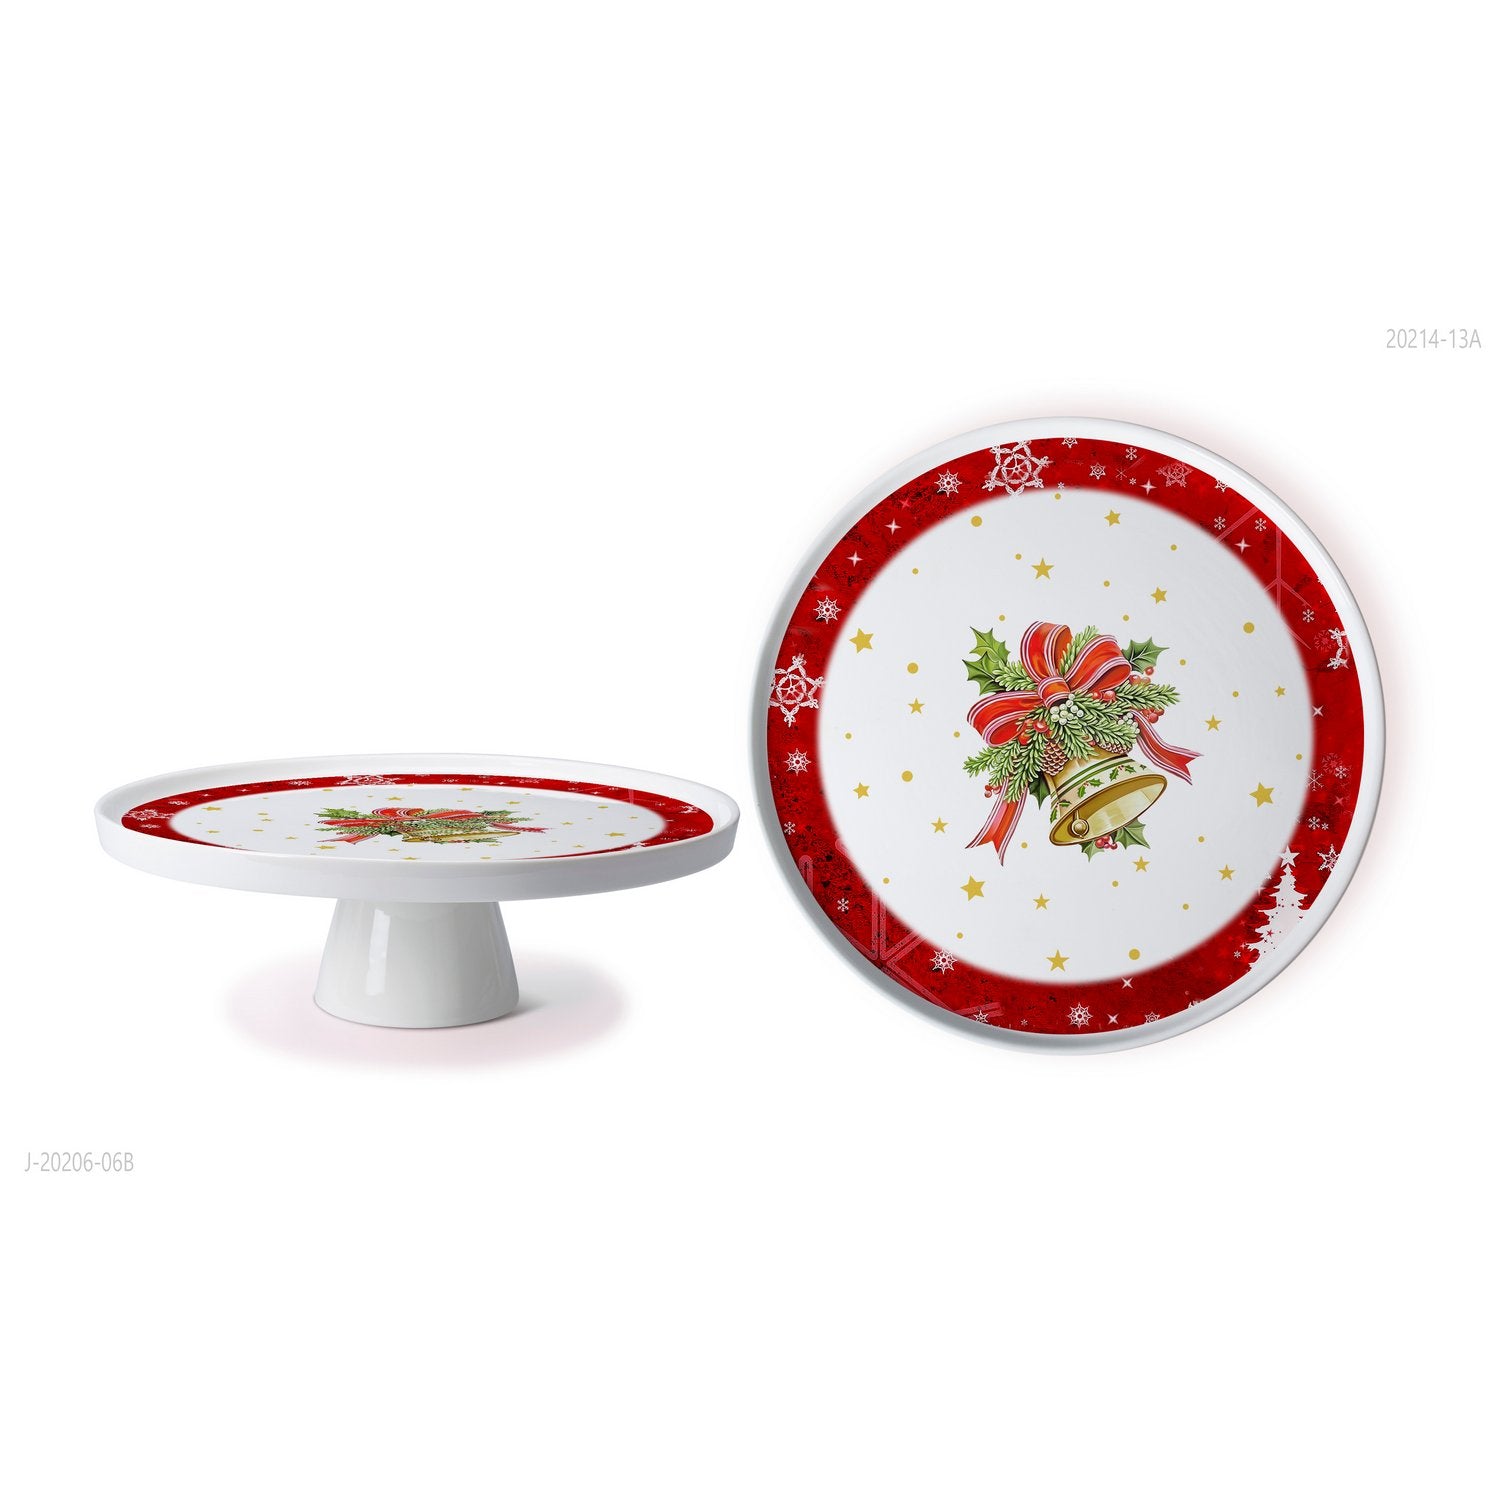 Alpine Cuisine New Bone China Serving Platters 11-inch with Elegant White Finish & Christmas Serving Platters Color Box for Versatile Display Table Stand | Perfect for Special Occasions & Easy Clean